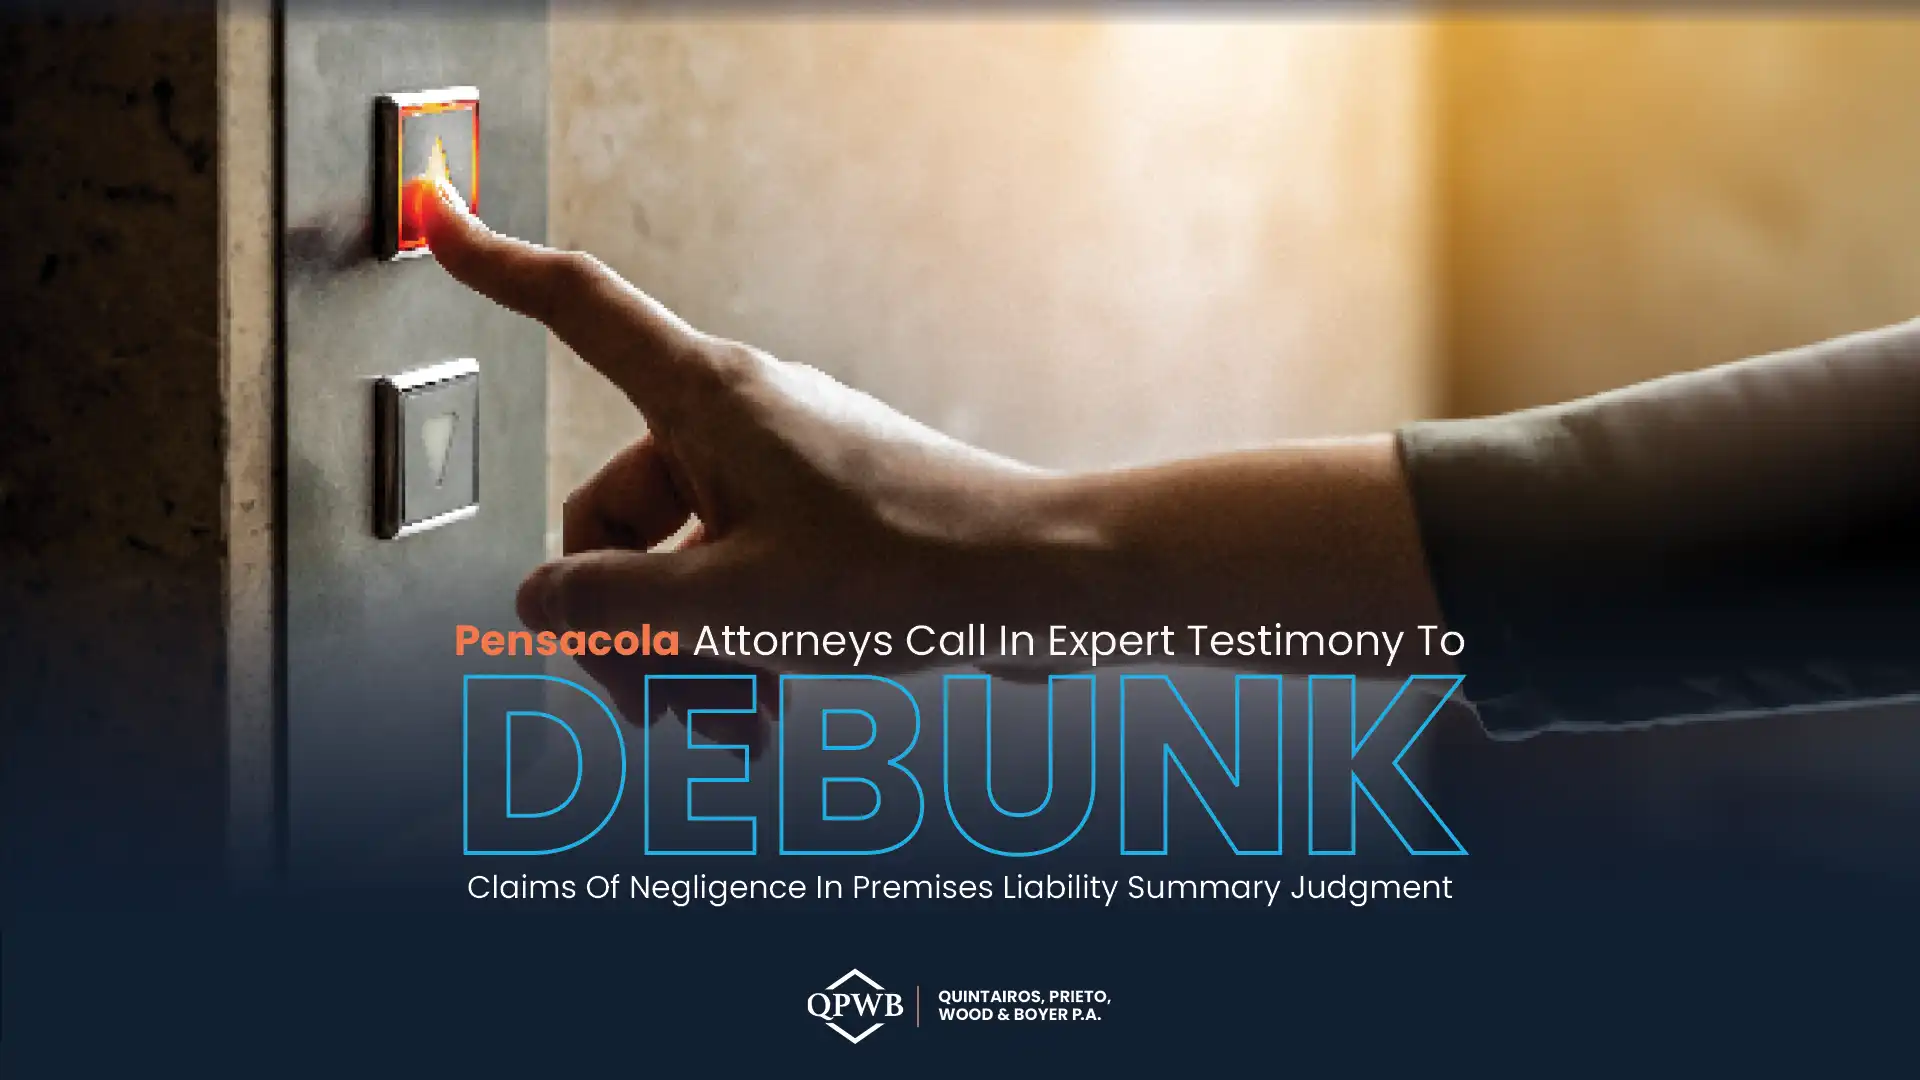 Pensacola Attorneys Call In Expert Testimony To Debunk Claims Of Negligence In Premises Liability Summary Judgment